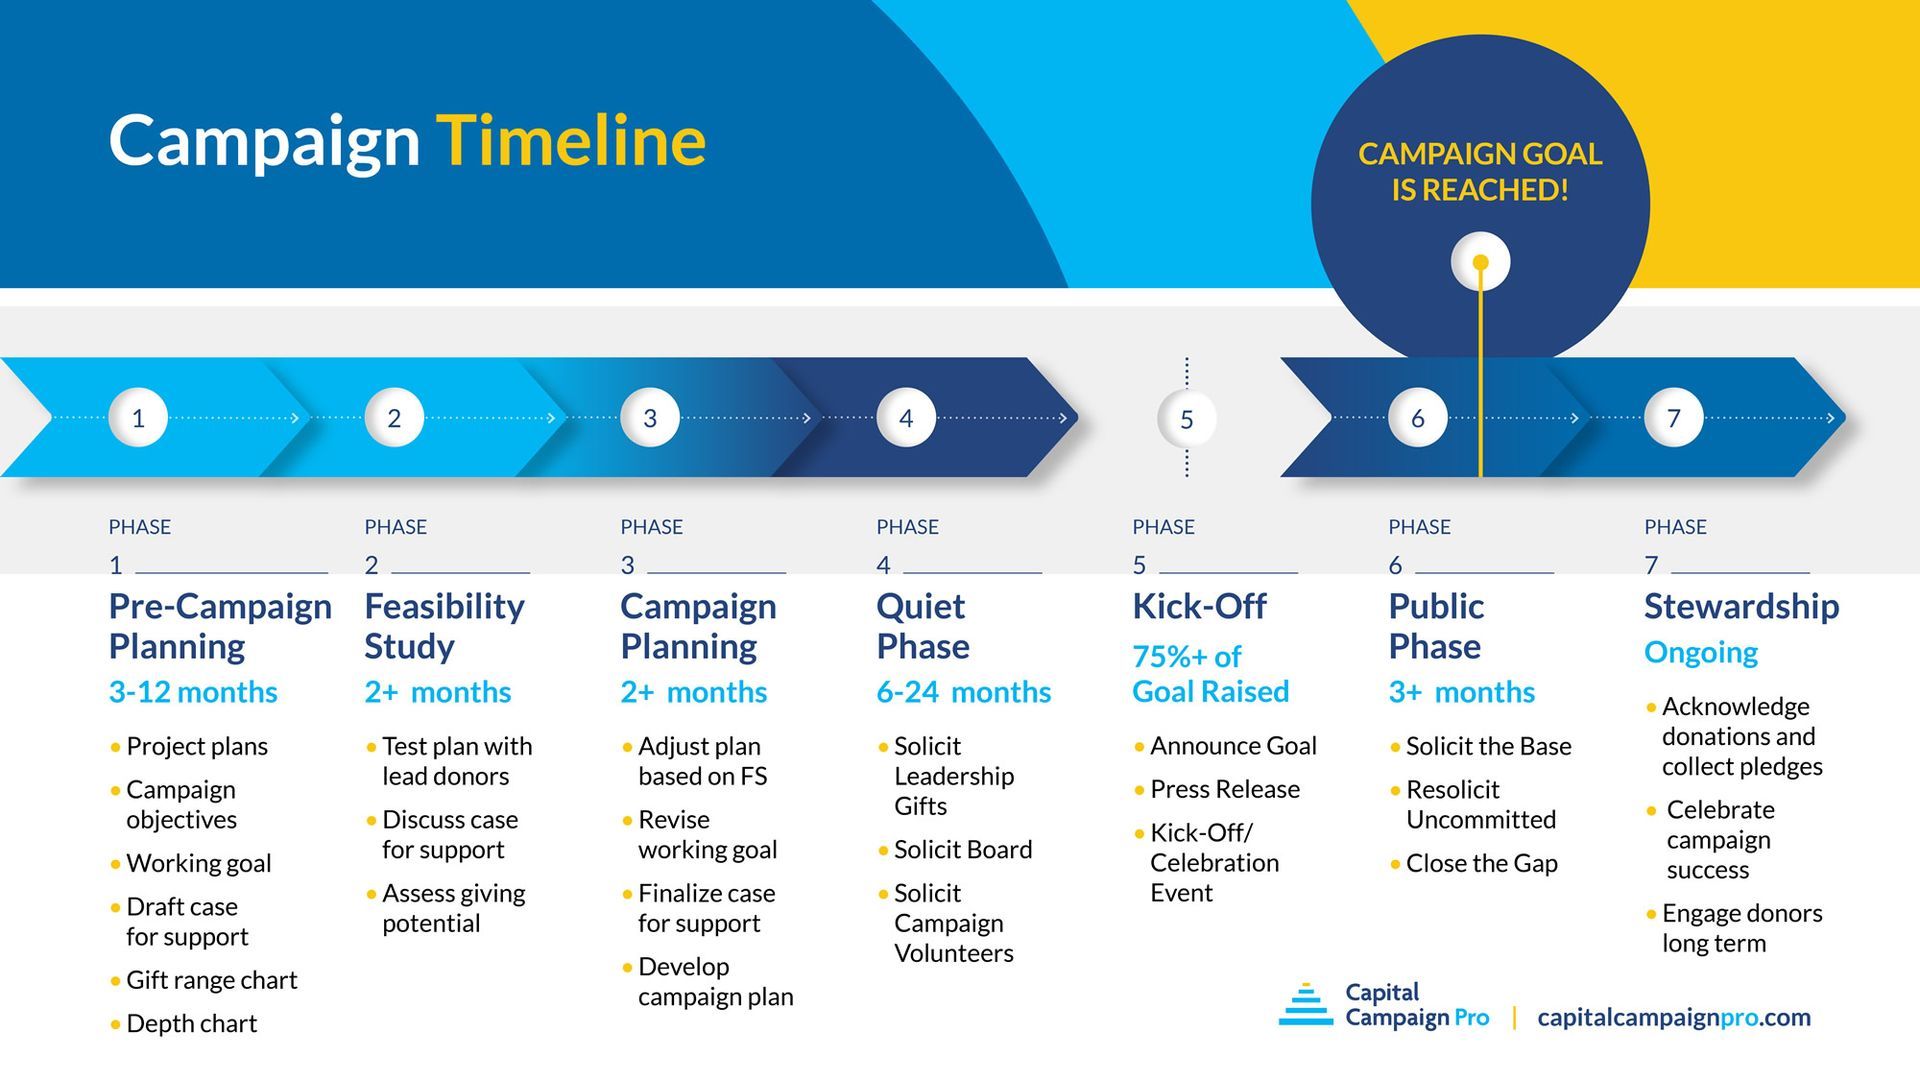 Timeline of capital campaign phases, which are described in the text below